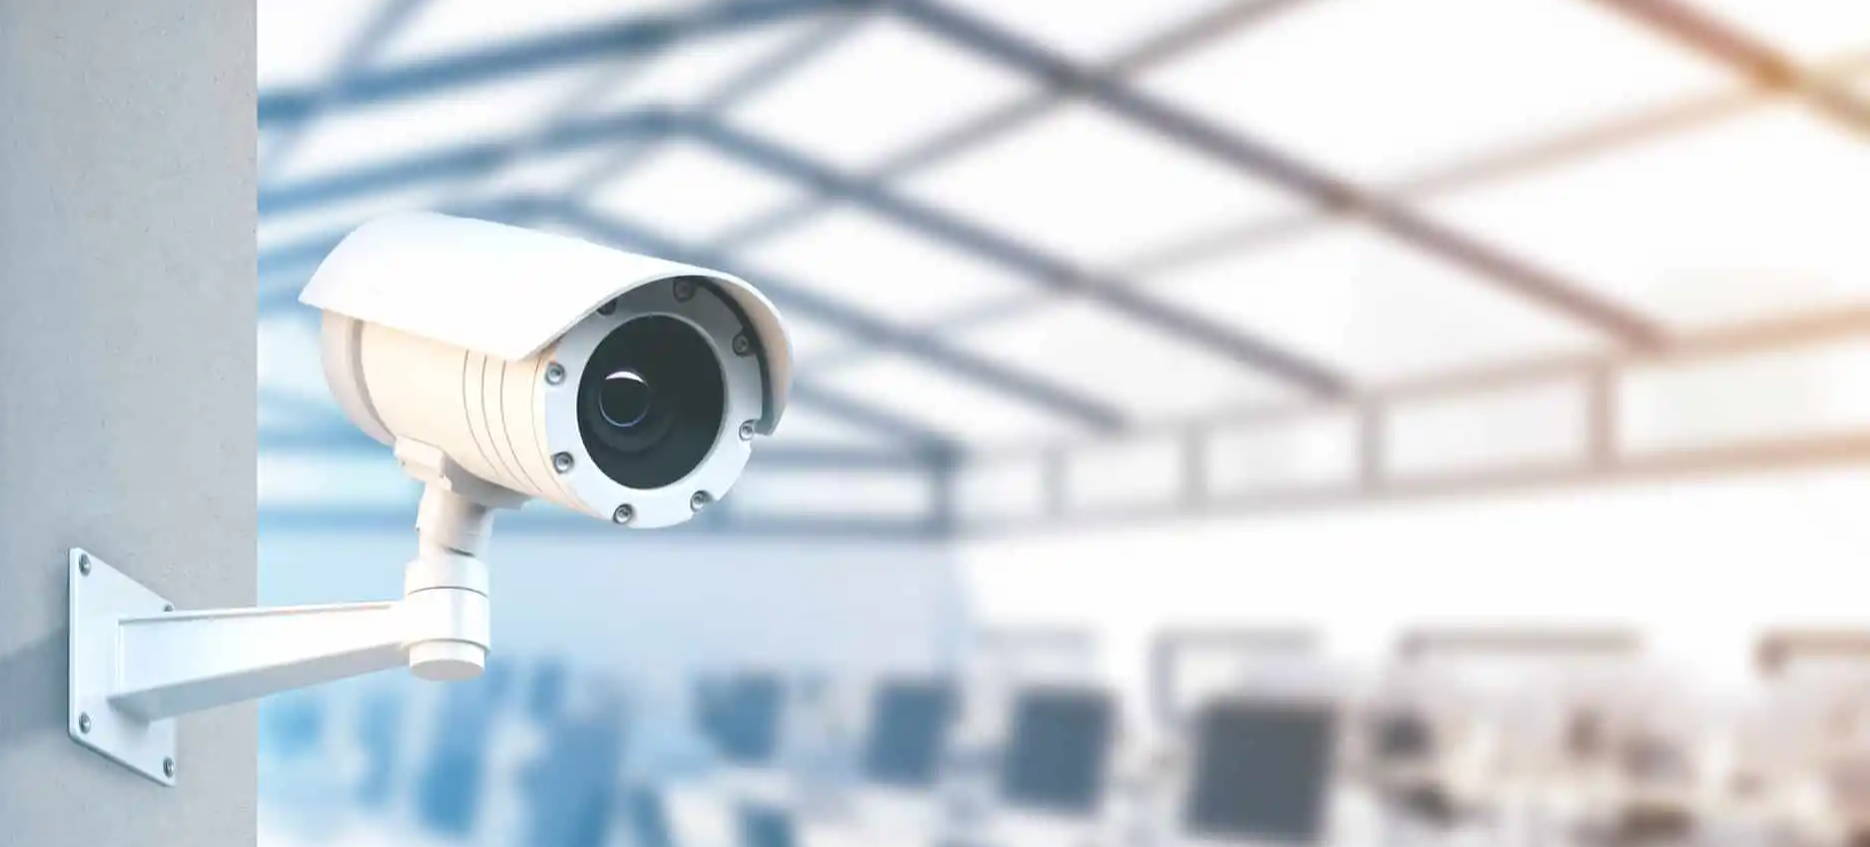 Axis cameras lead the way into the digital age